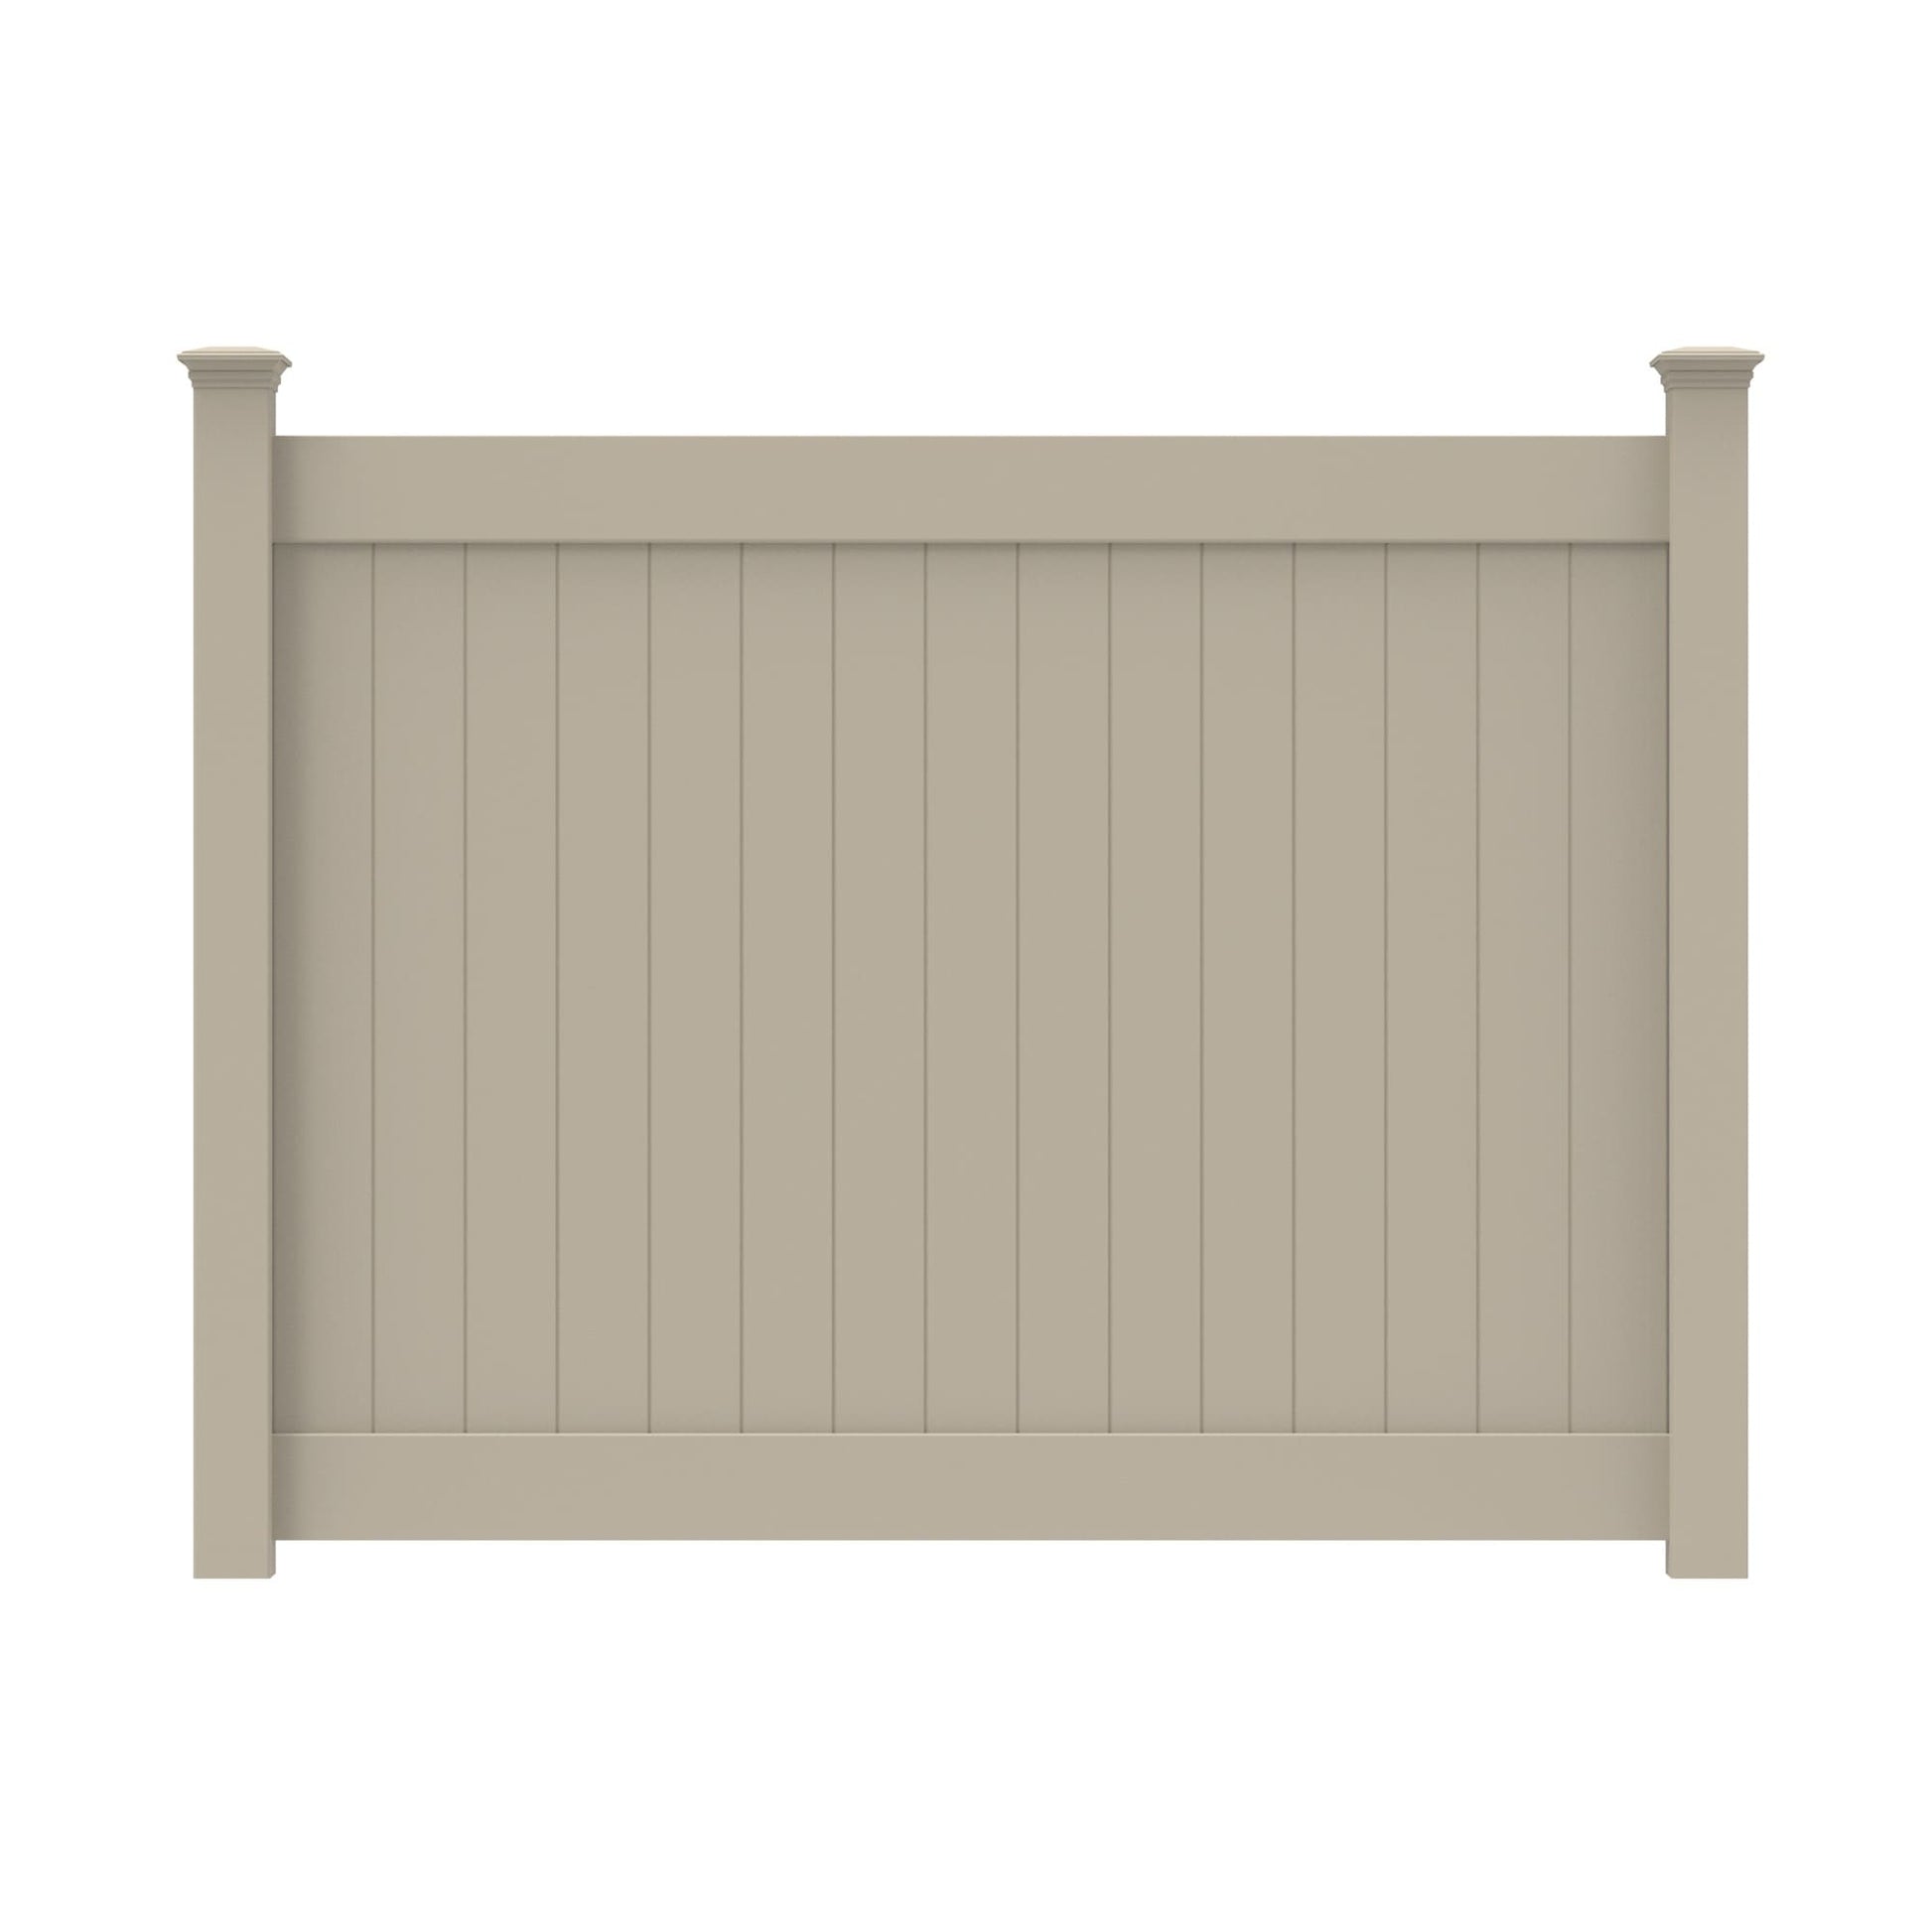 Dogwood Home Series - Fence Panel - 6' x 8'-Vinyl Fence Panels-ActiveYards-Clay-FenceCenter